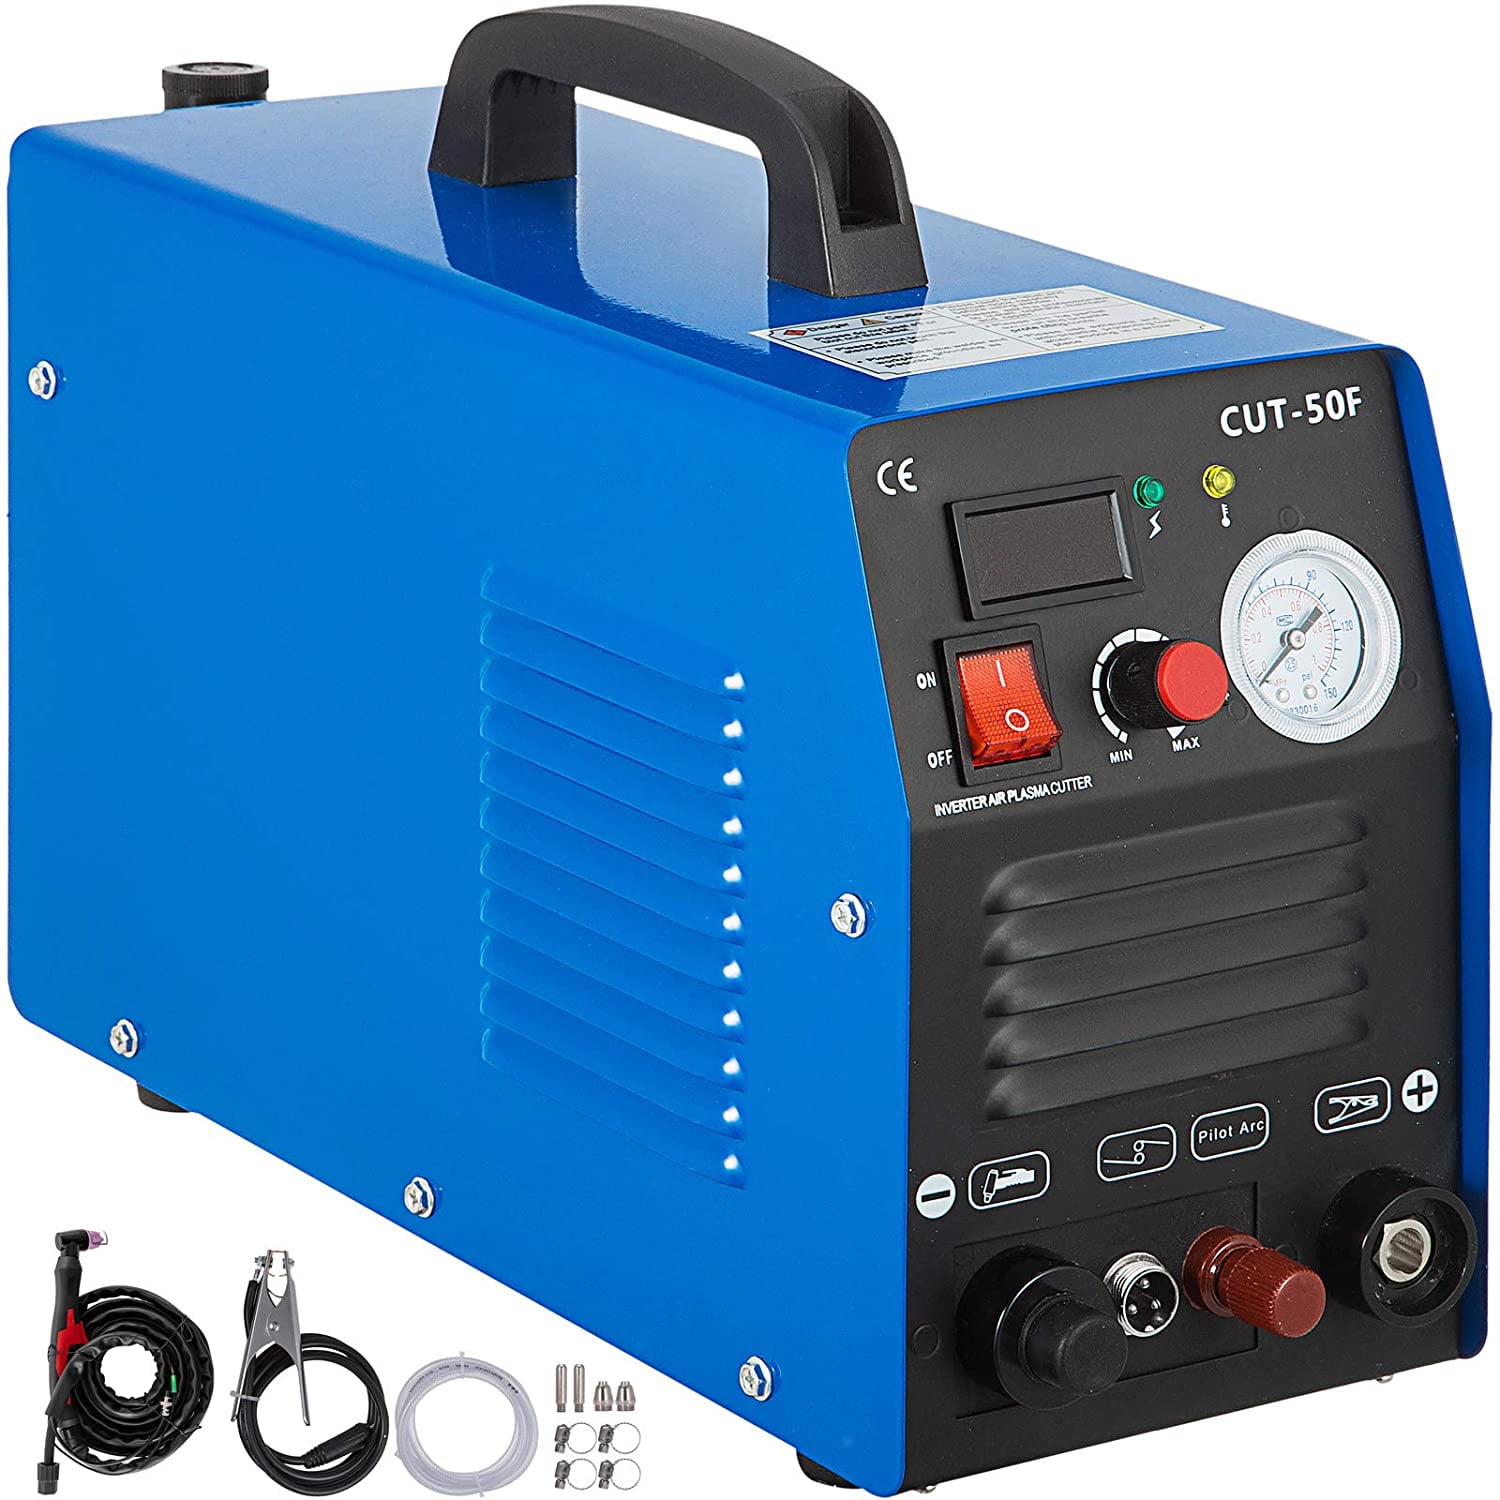 50 AMP 14mm Cut HF Start Air Plasma Cutter Everything Included With Consumables 